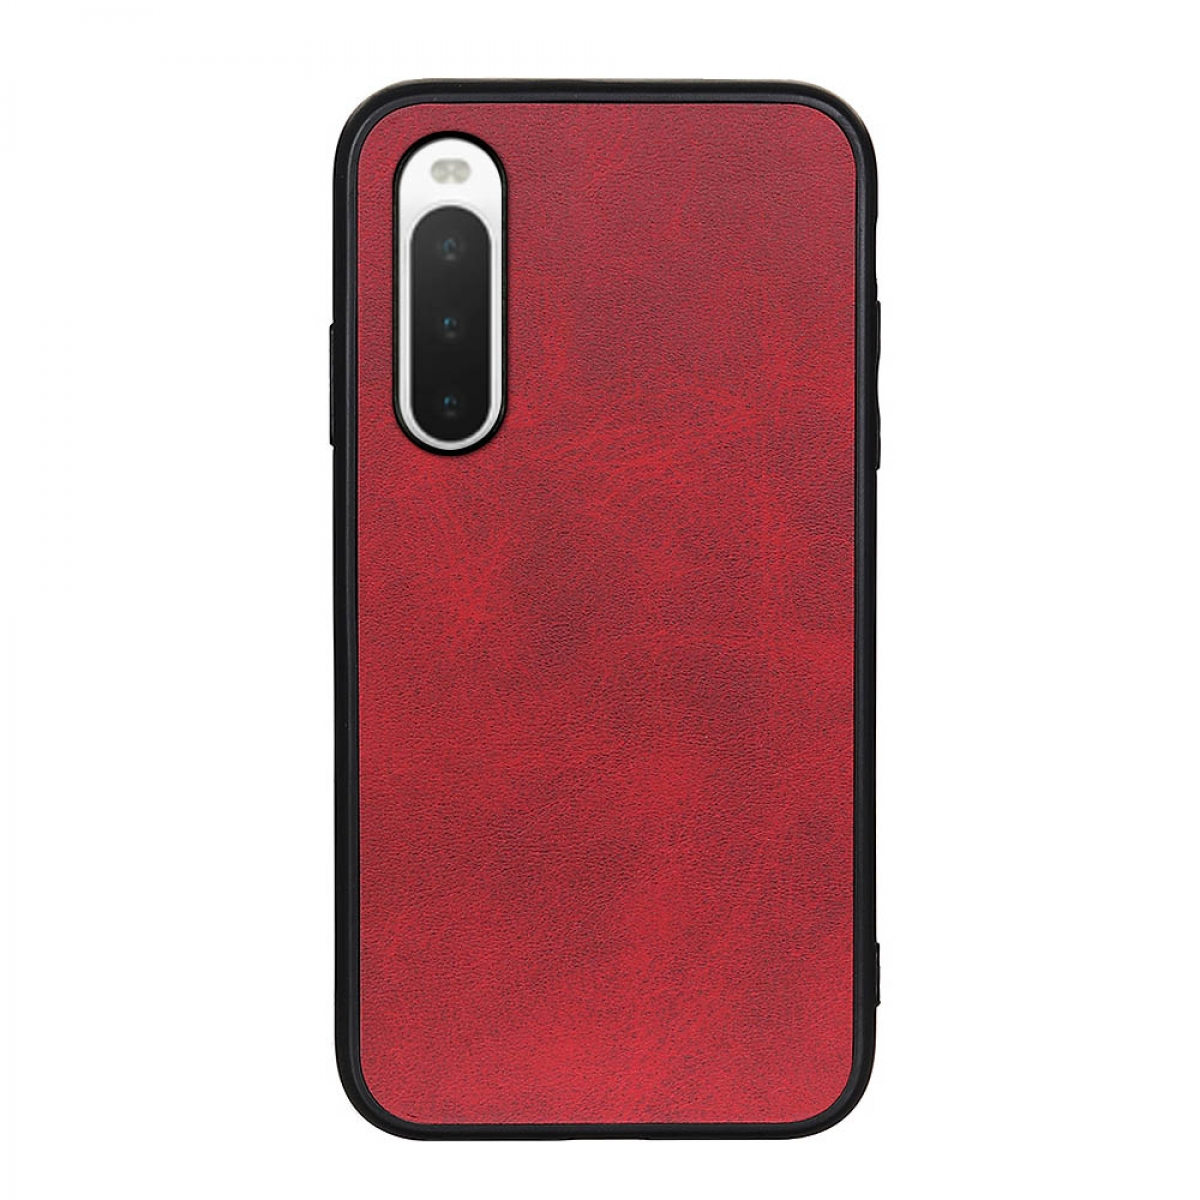 Backcover, IV, 5 Business, Xperia CASEONLINE Rot Sony,